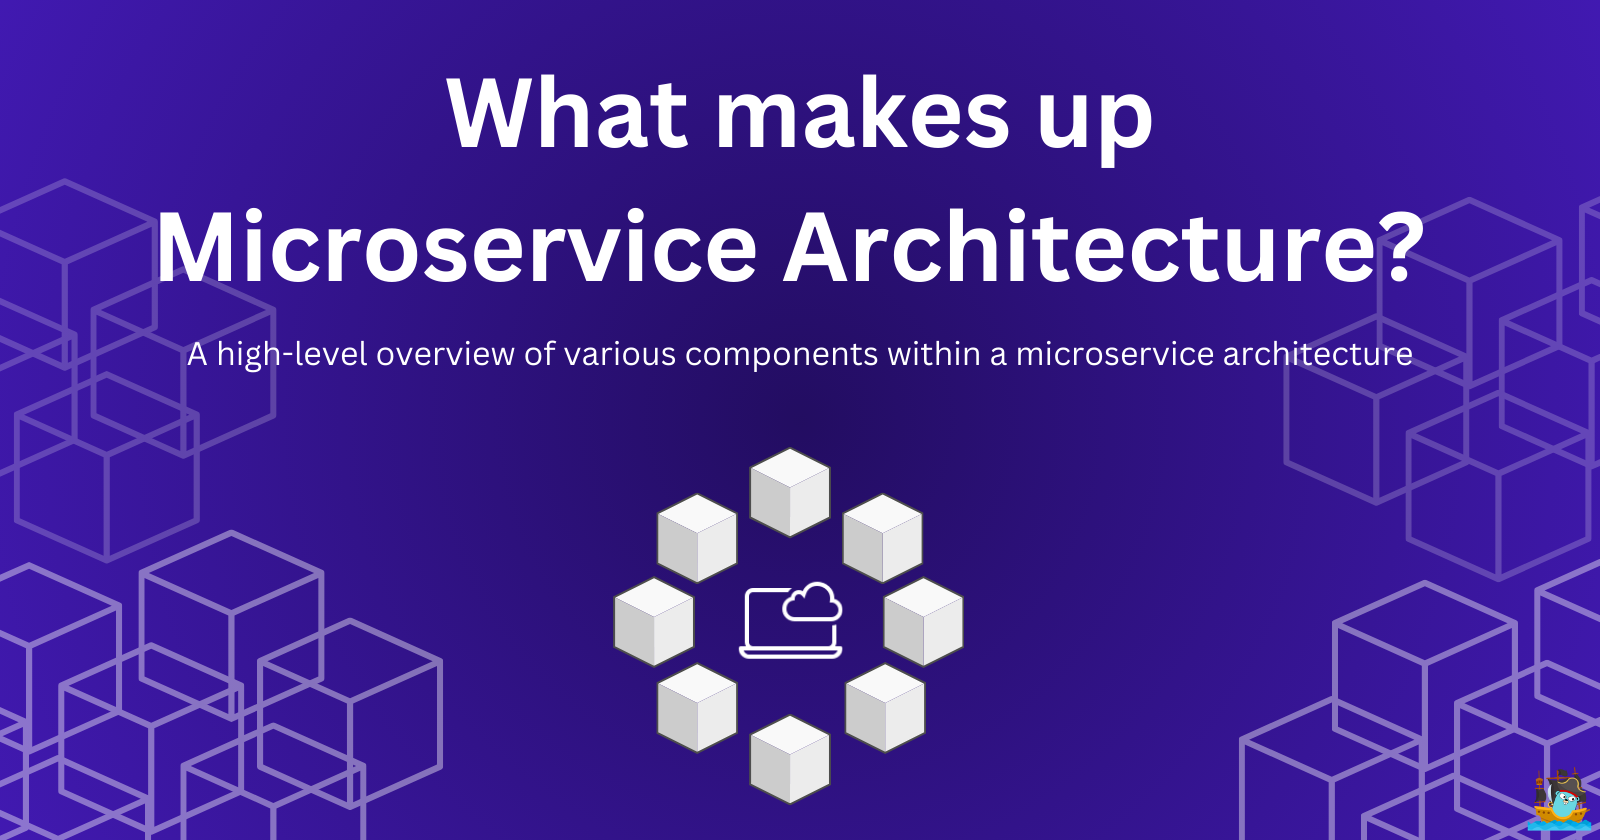 What makes up Microservice Architecture?